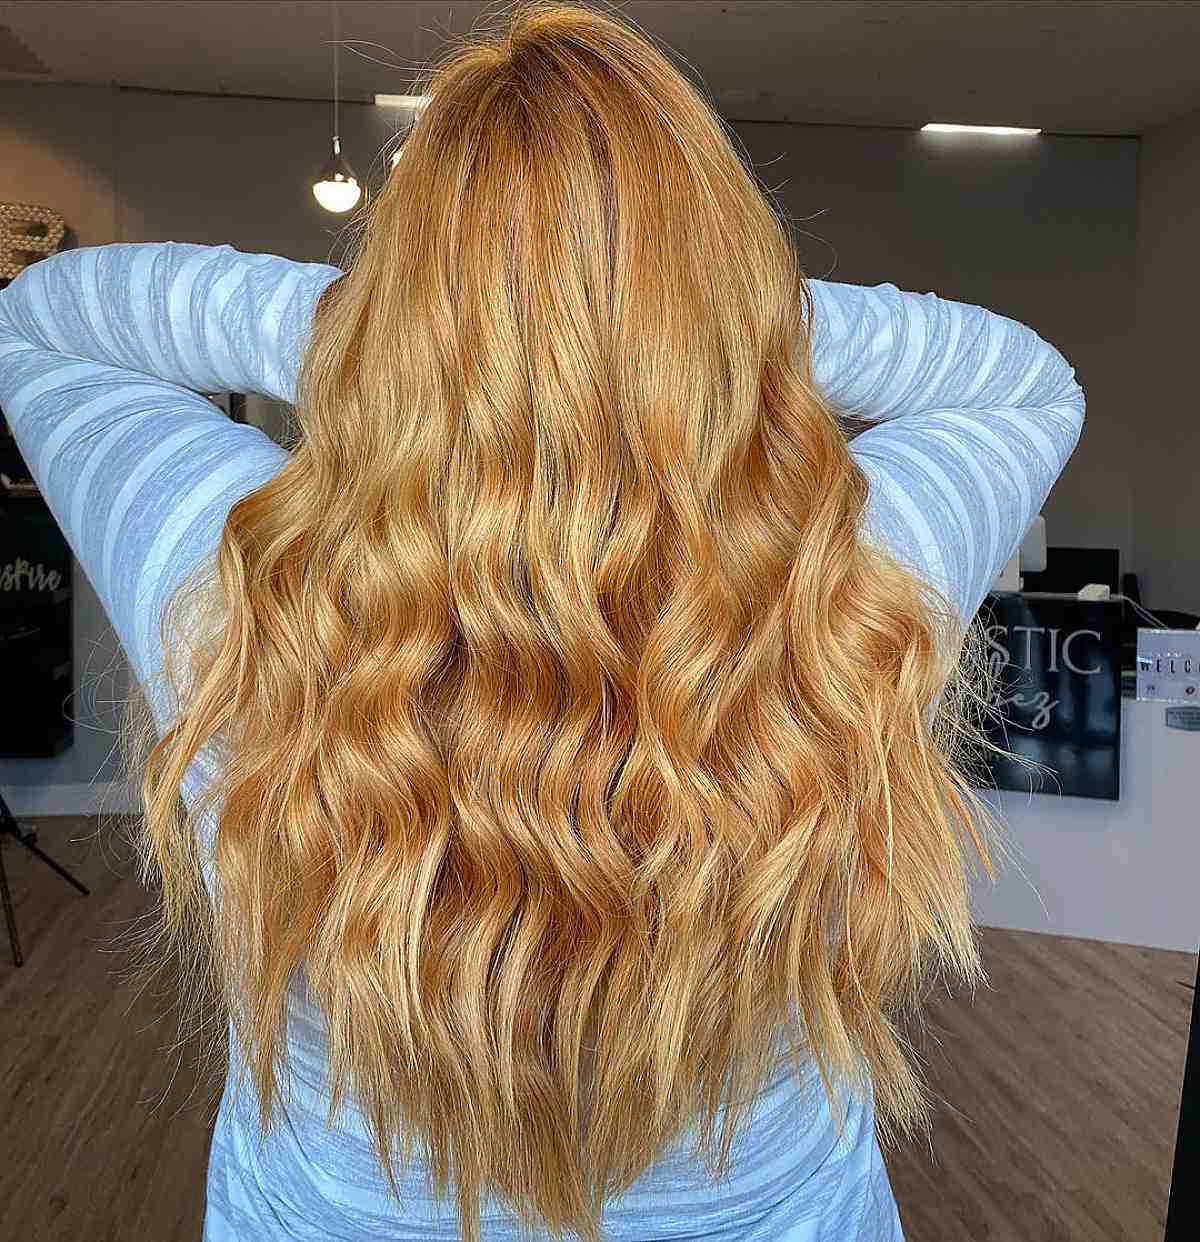 Golden hair color at home using eazicolor  YouTube